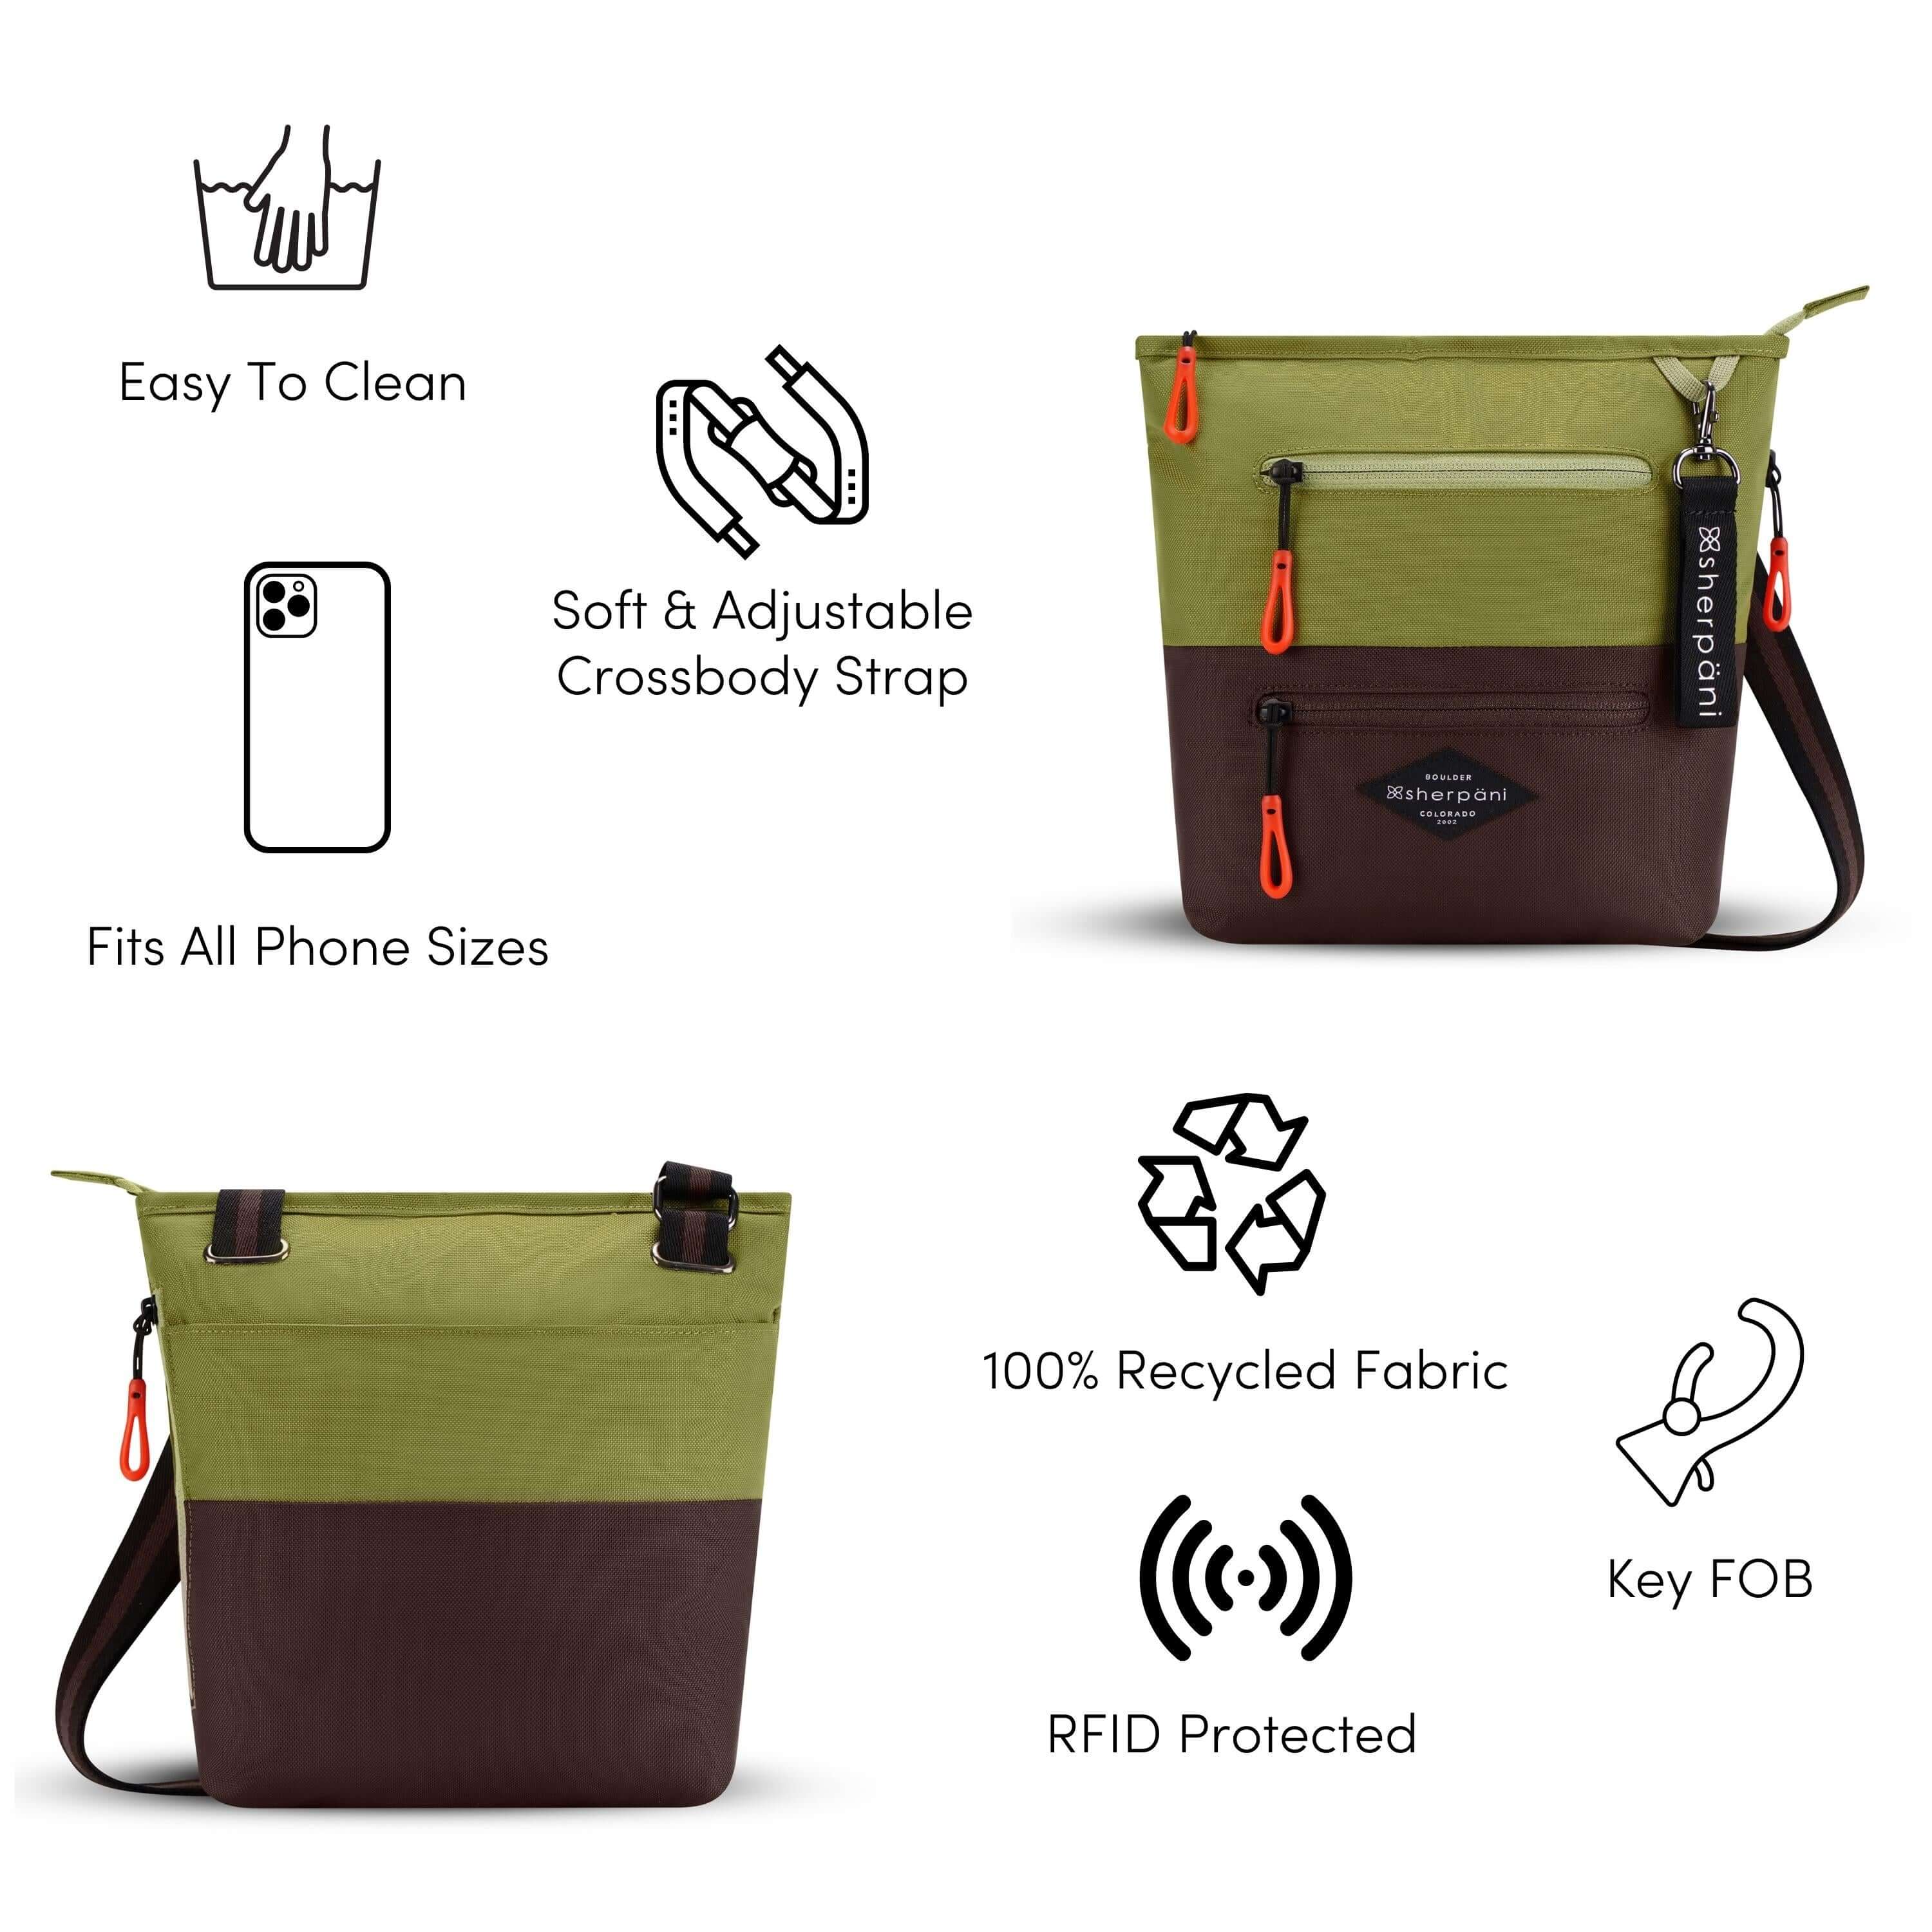 A Graphic showing the features of Sherpani&#39;s crossbody, the Sadie. There is a front and back view of the bag. The following features are highlighted with corresponding graphics: Easy To Clean, Soft &amp; Adjustable Crossbody Strap, Fits All Phone Sizes, 100% Recycled Fabric, Key FOB, RFID Protected.